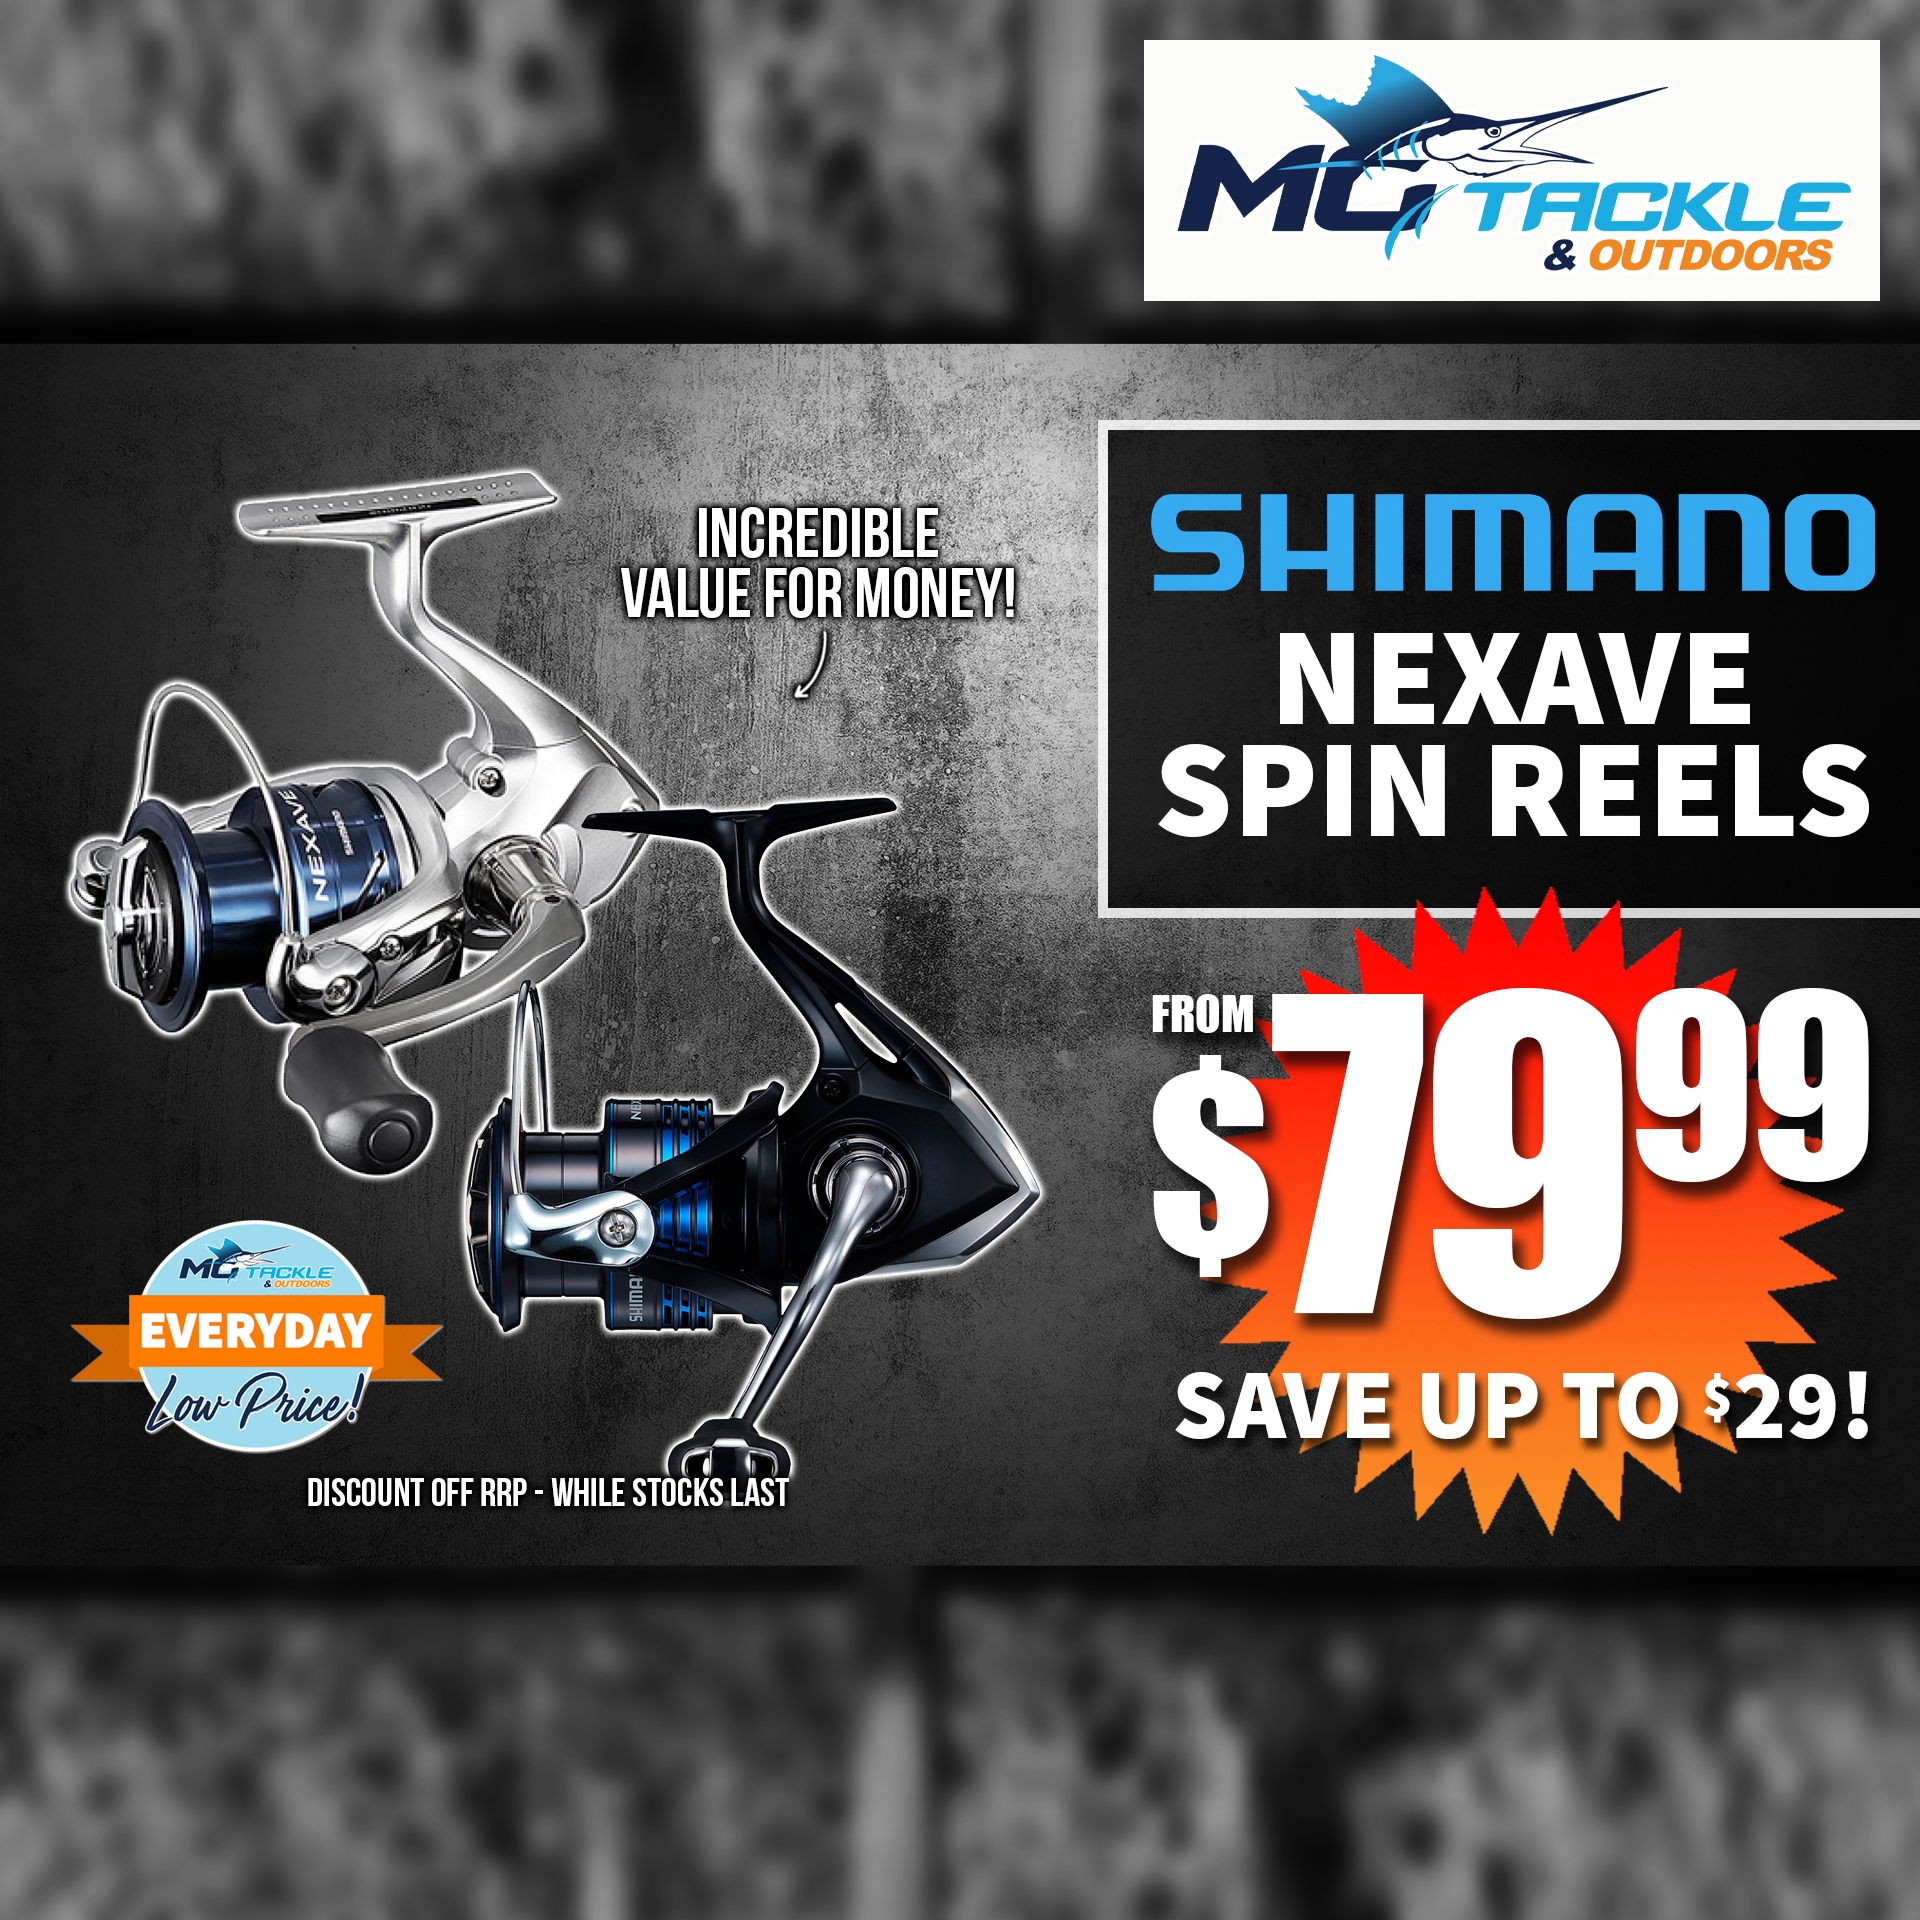 Shimano Nexave Spin Reels from $79.95